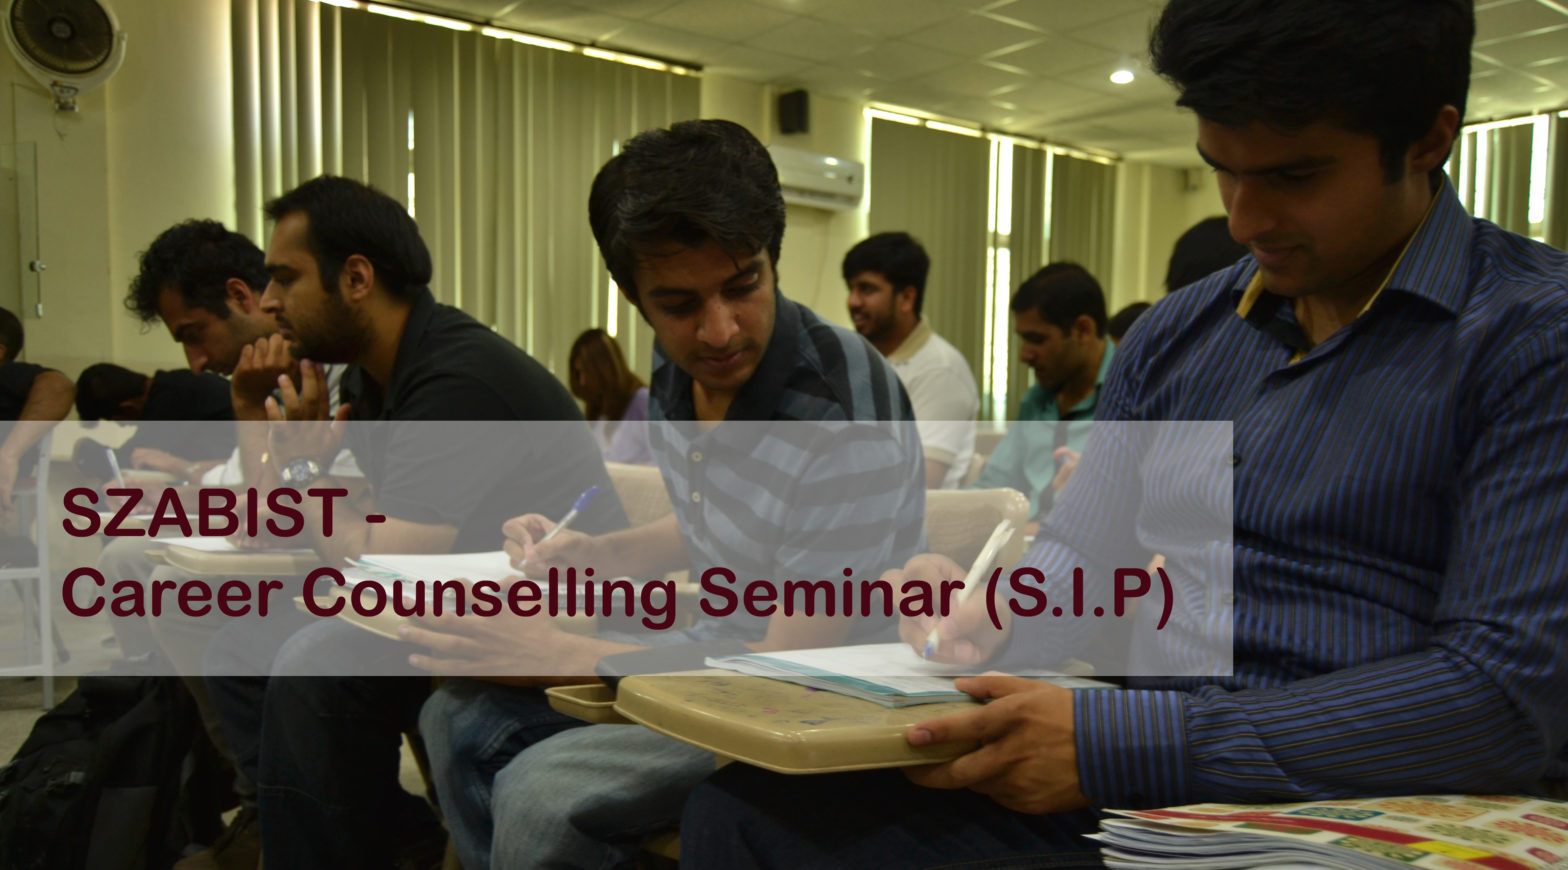 SZABIST – Career Counselling Session by BrightSpyre